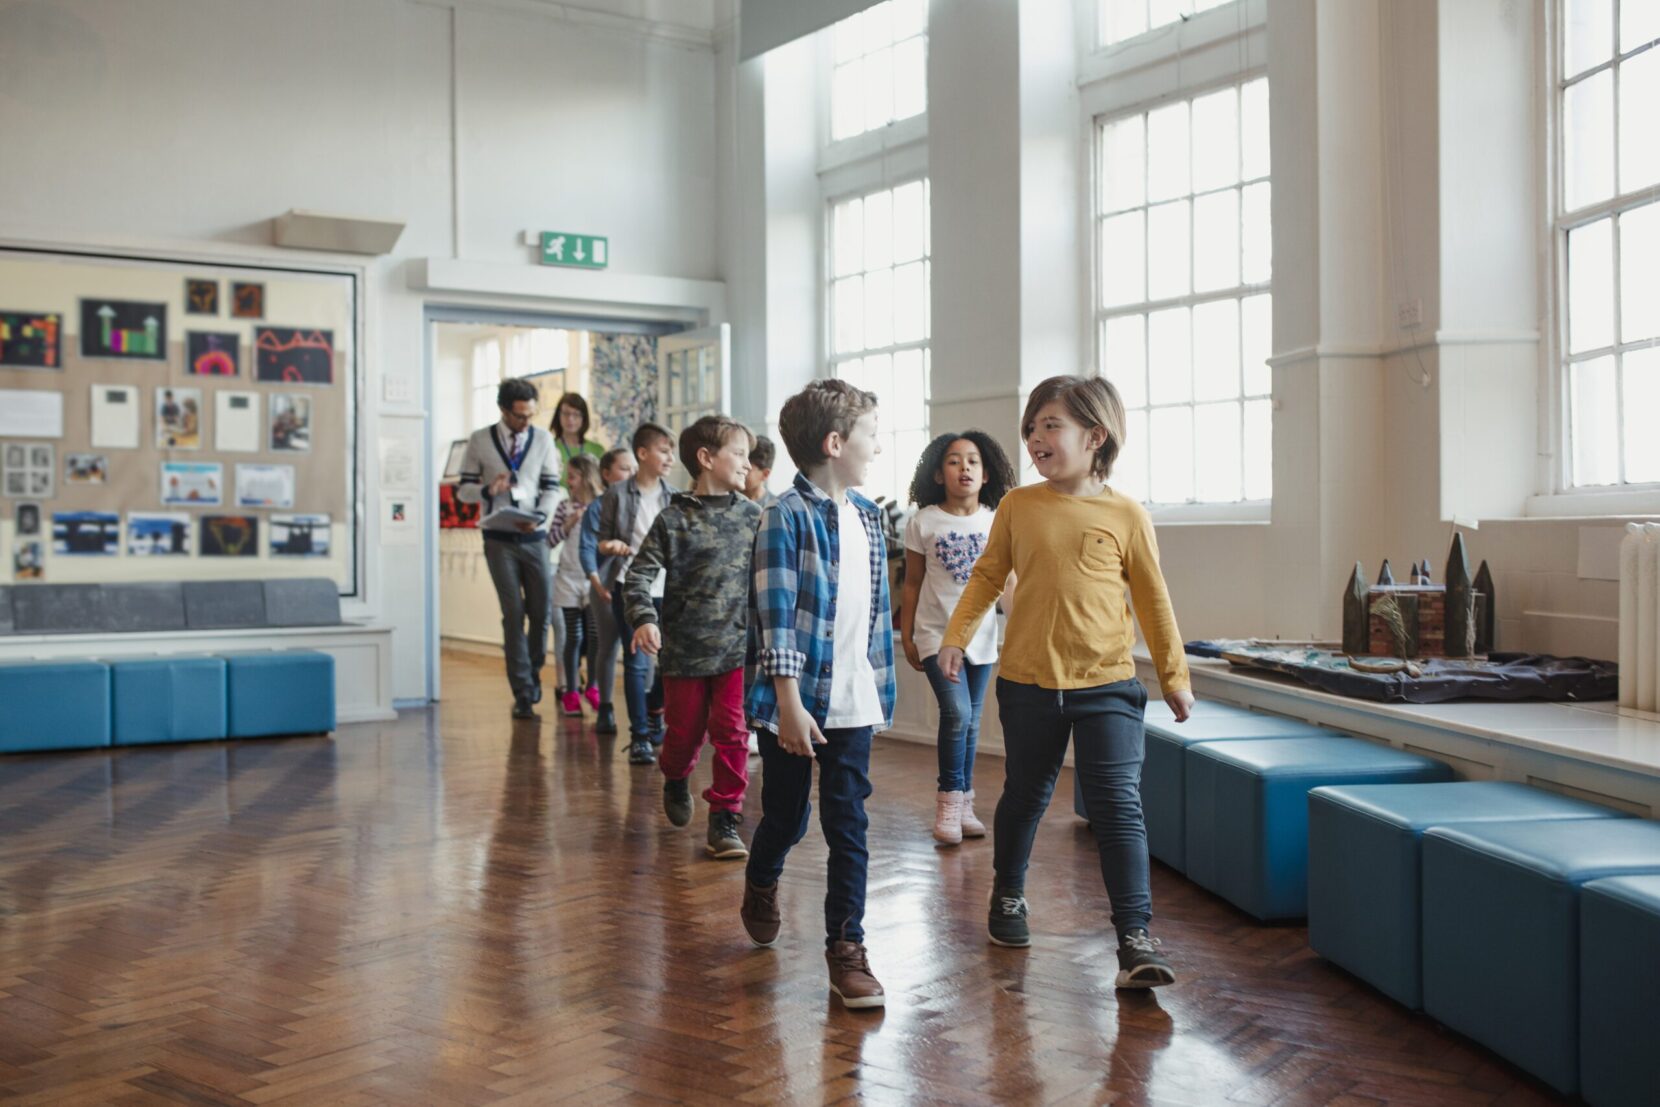 A group of elementary school children wearing casual clothing walk through the hall as their teachers walk behind them. This is a school in Hexham, Northumberland in north eastern England.